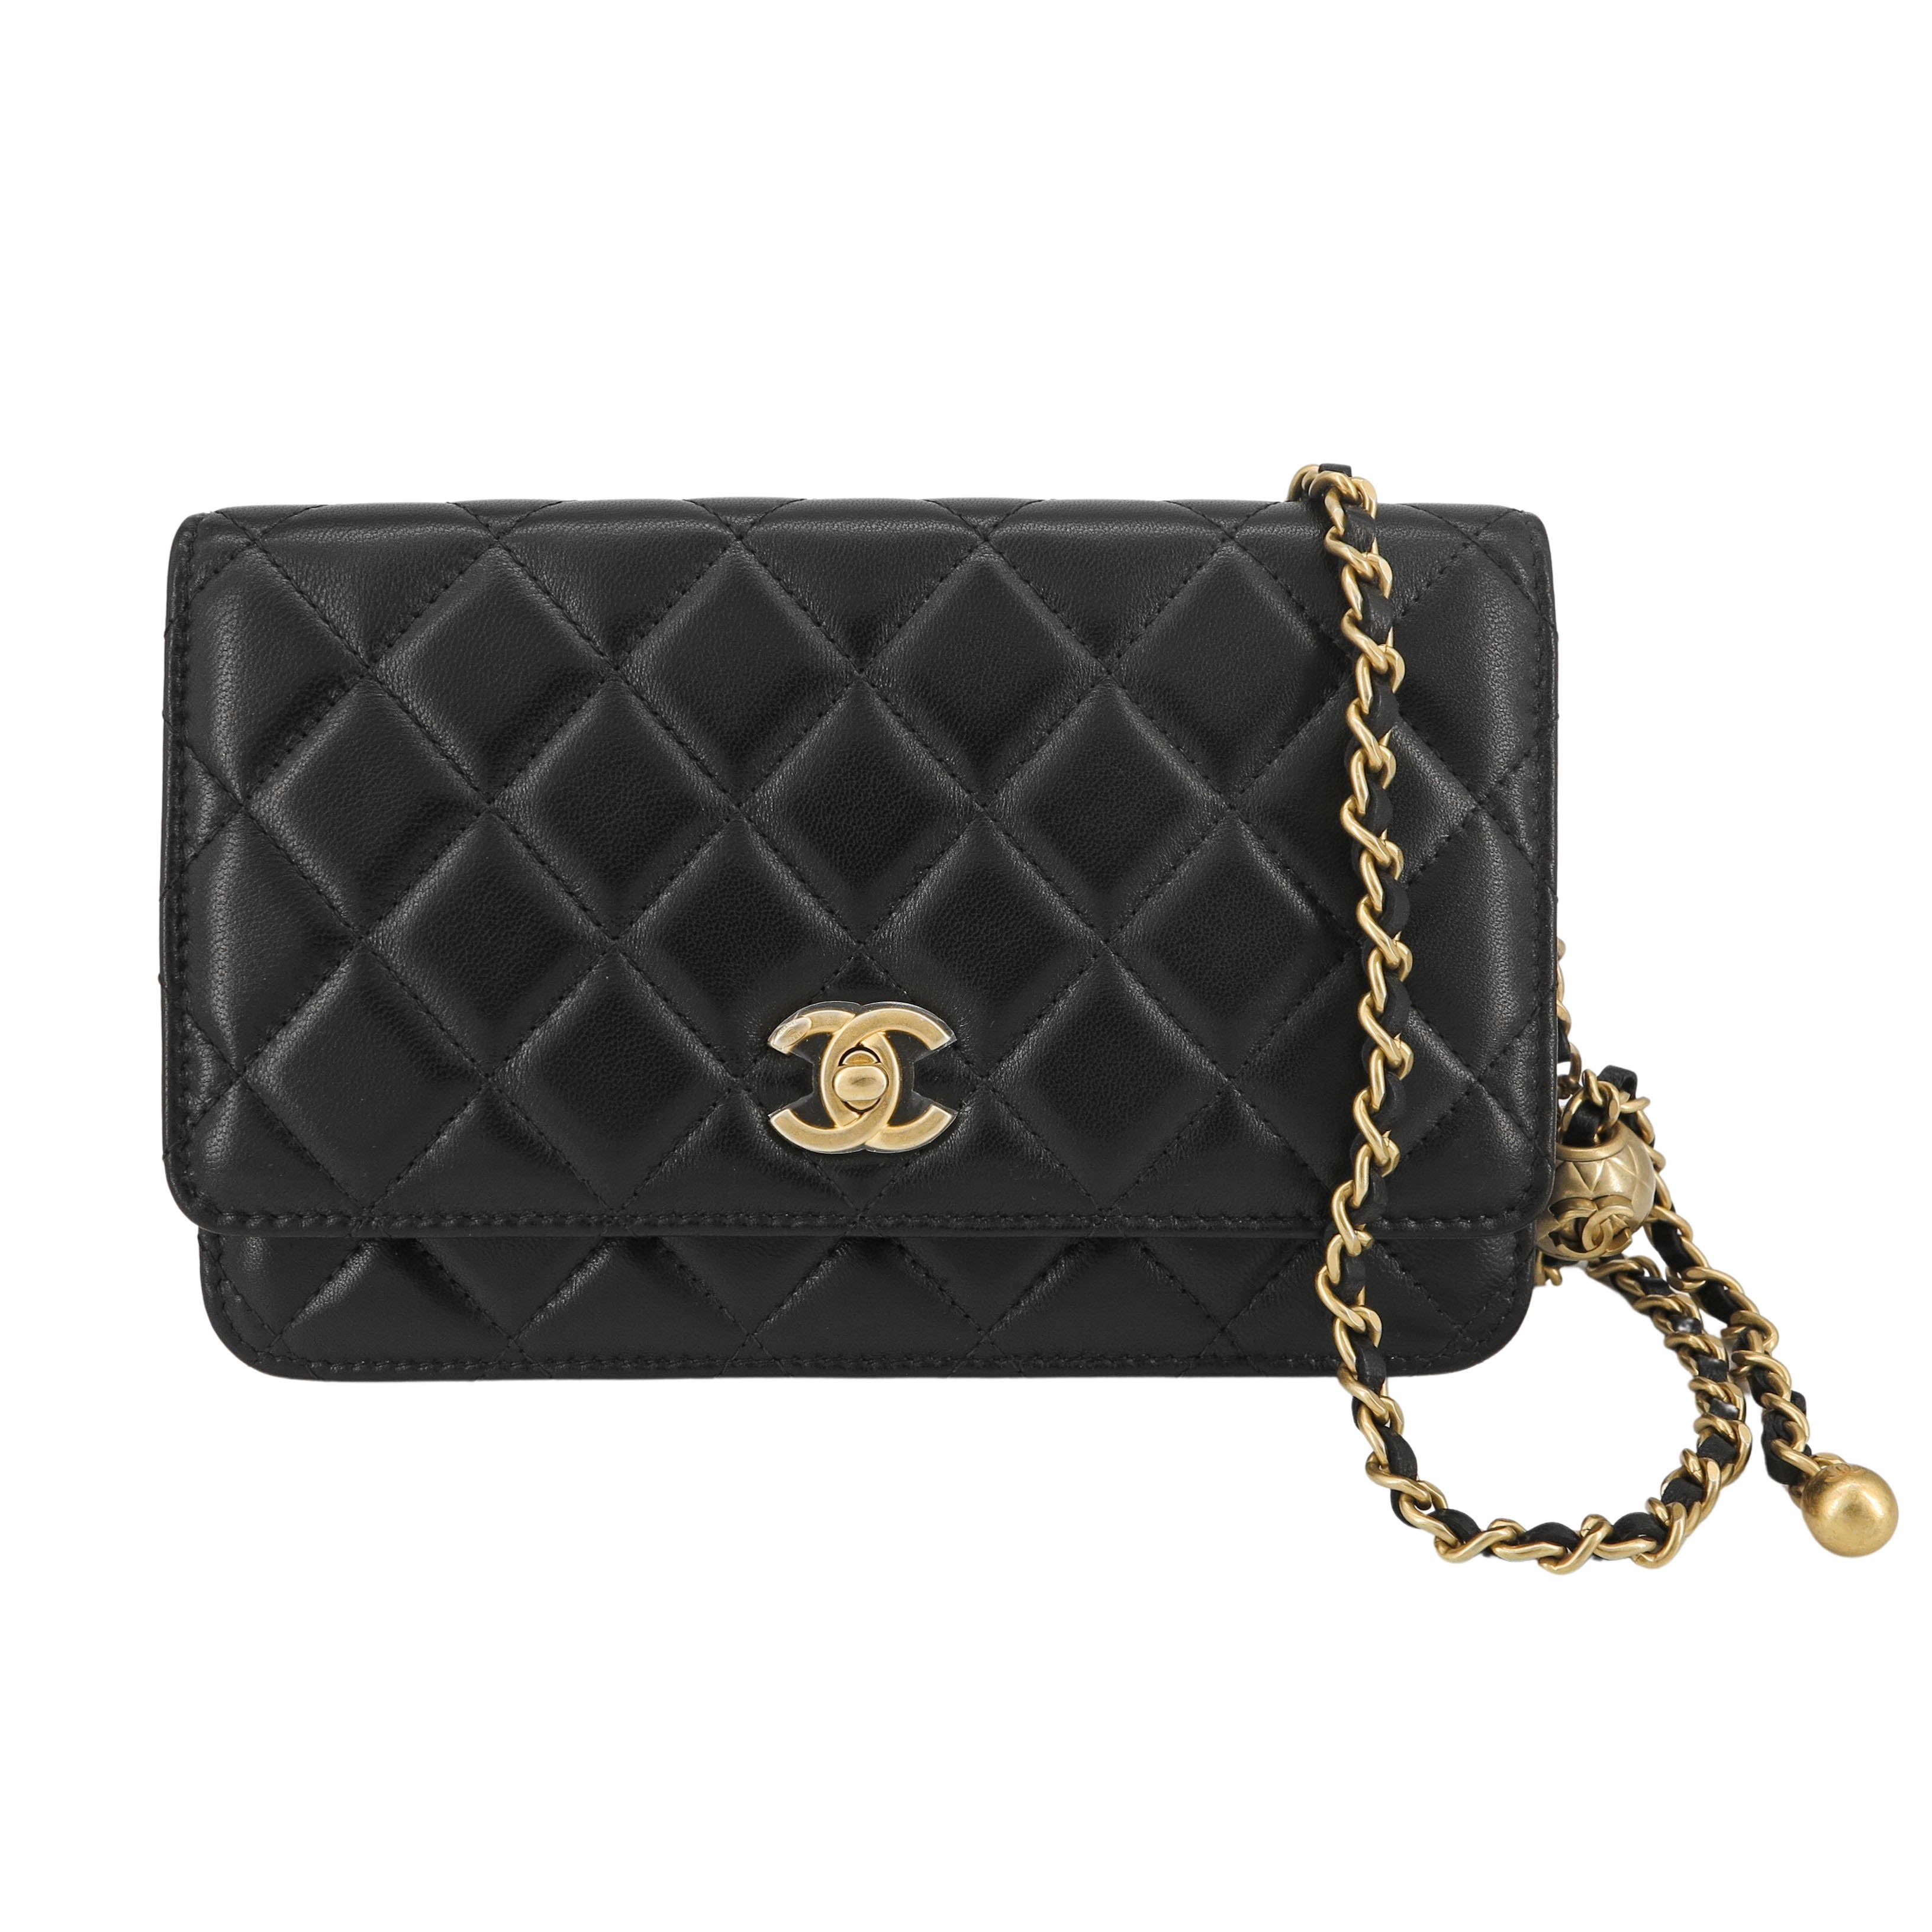 Chanel CHANEL 19 Shiny Lambskin Zip-Around Coin Purse with Gold Hardware  (Wallets and Small Leather Goods,Wallets)